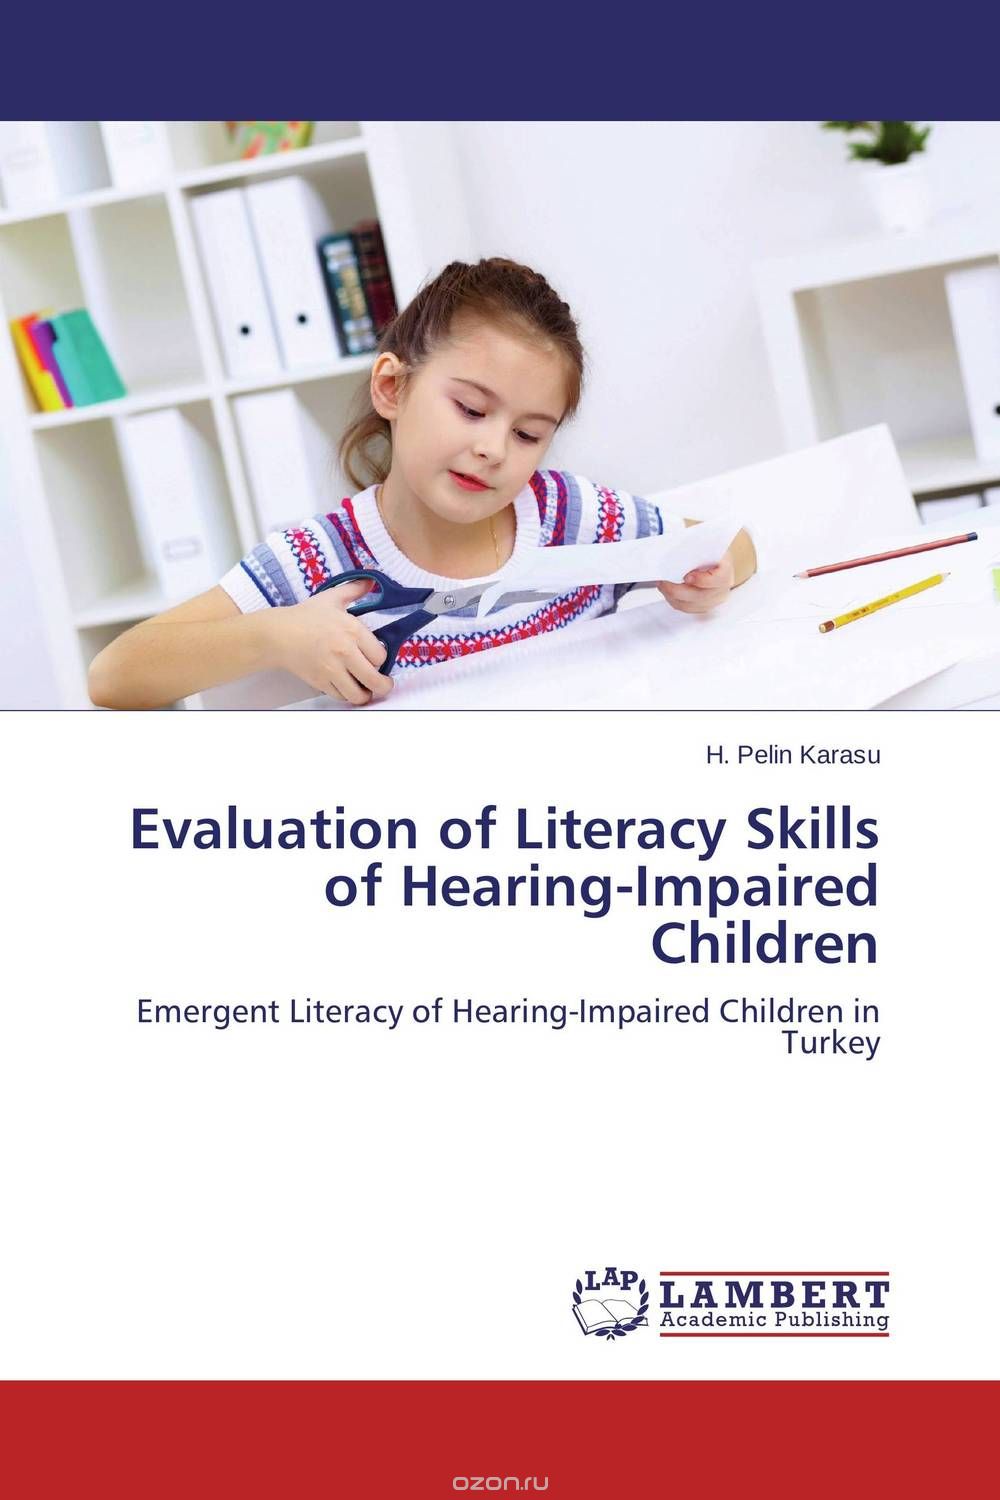 Evaluation of Literacy Skills of Hearing-Impaired Children